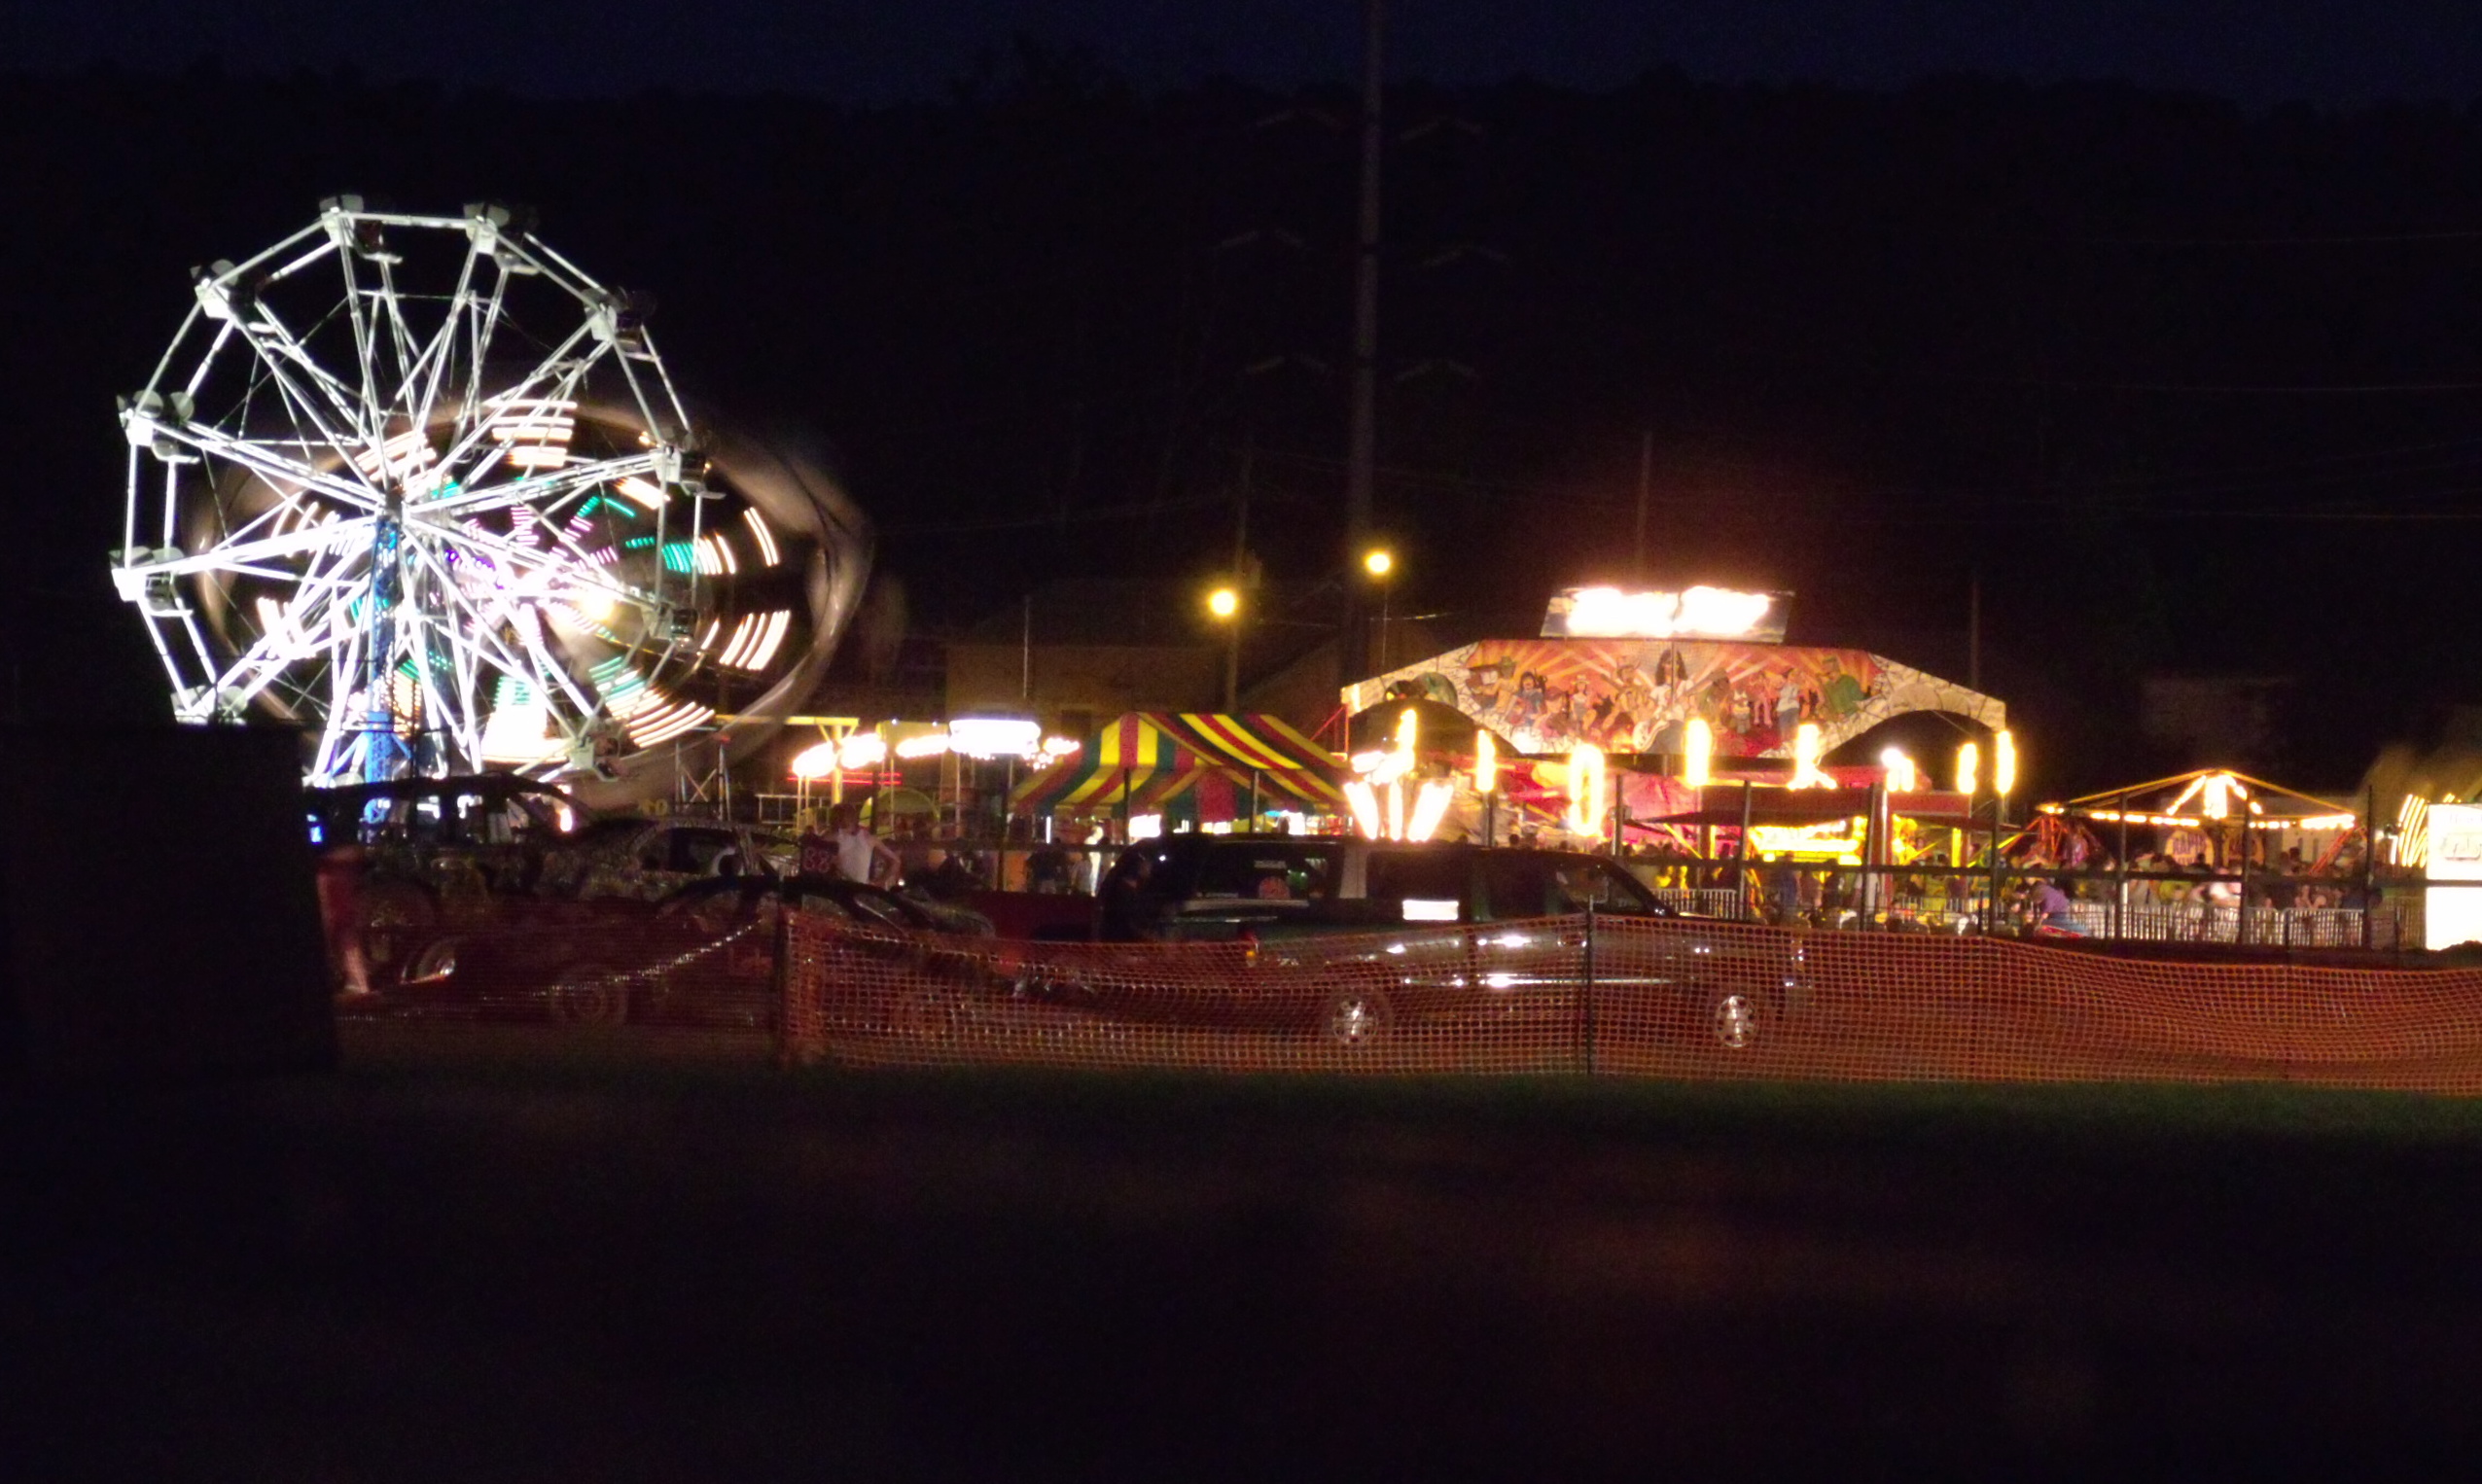 Main Event Amusements selected for this year’s amusement rides at the fair